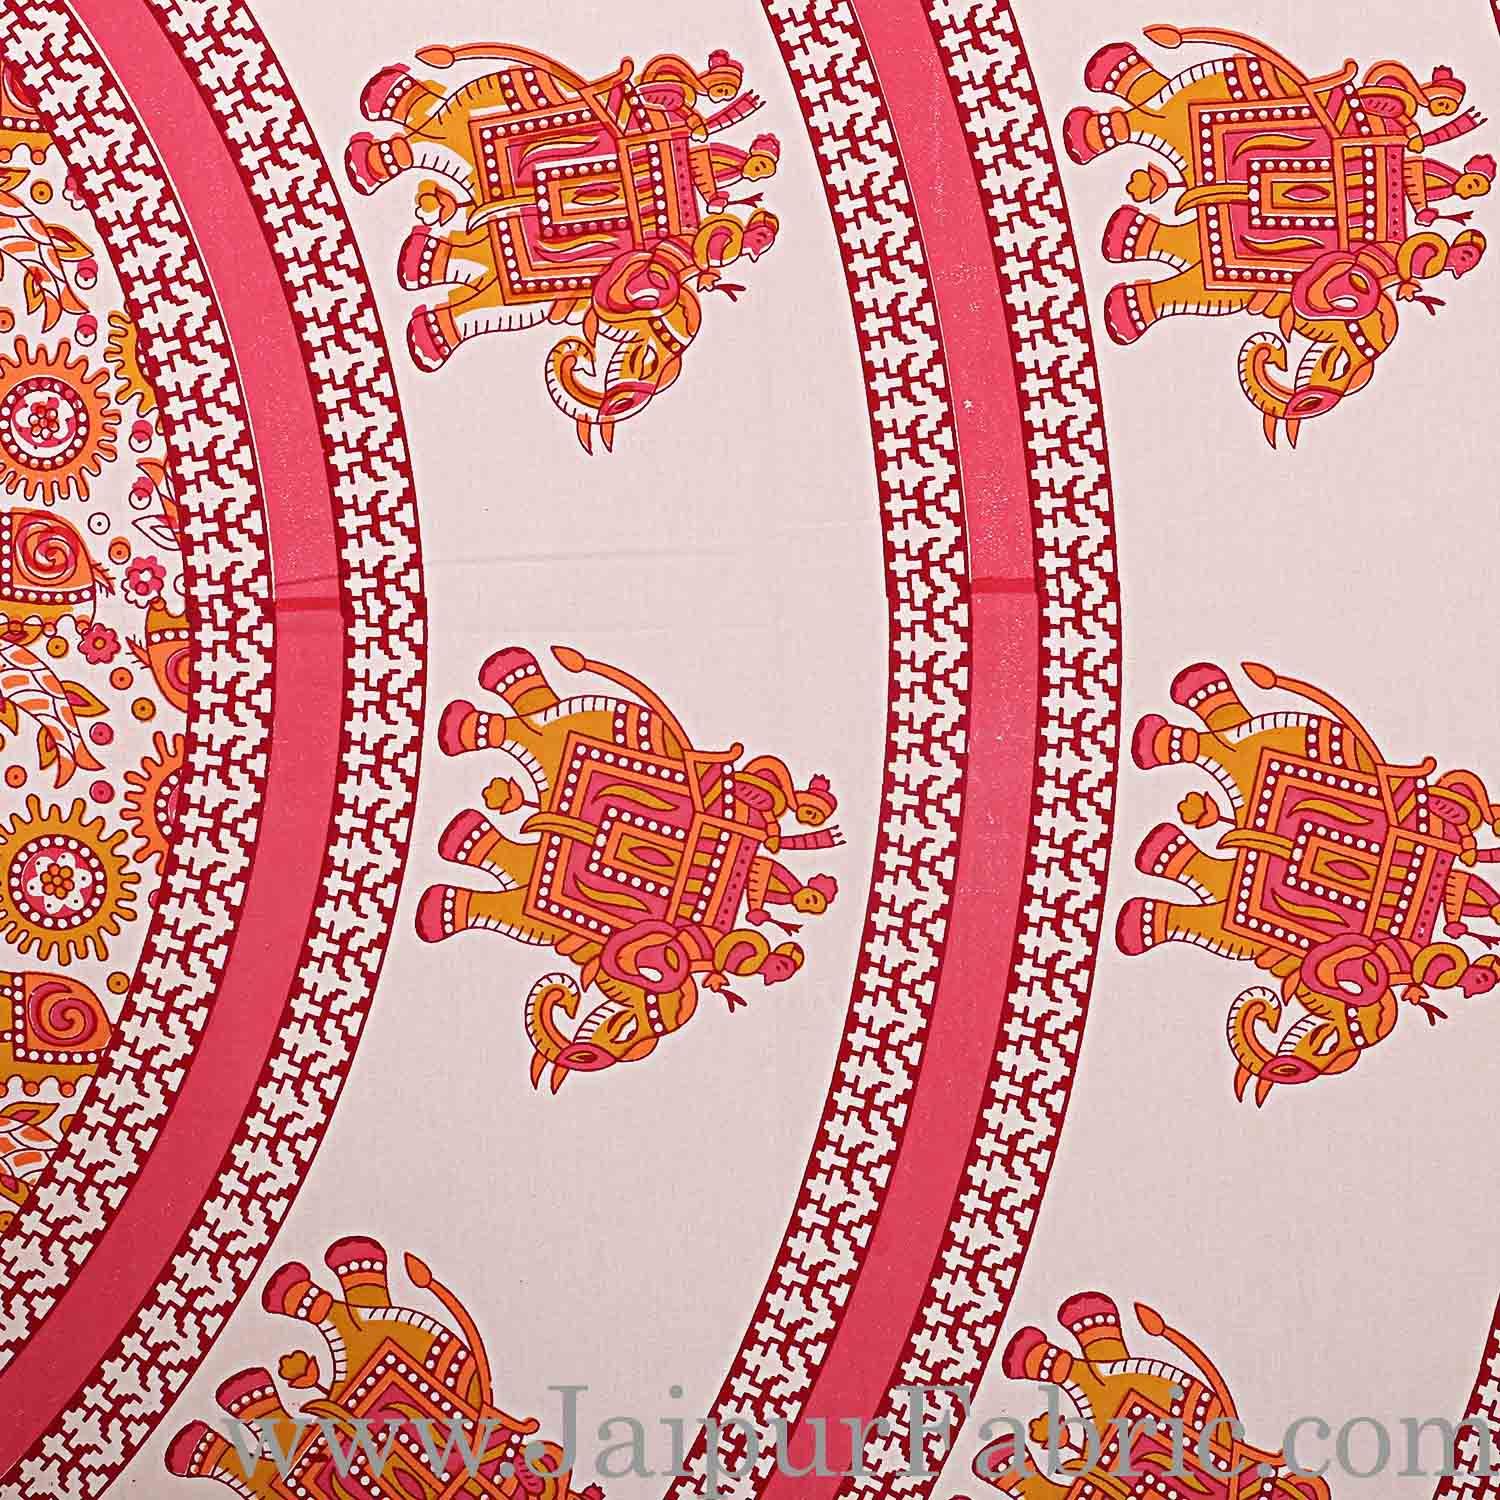 King Size Bedsheet Pink Border Circle Elephant Pattern Screen Print With Two Pillow Cover